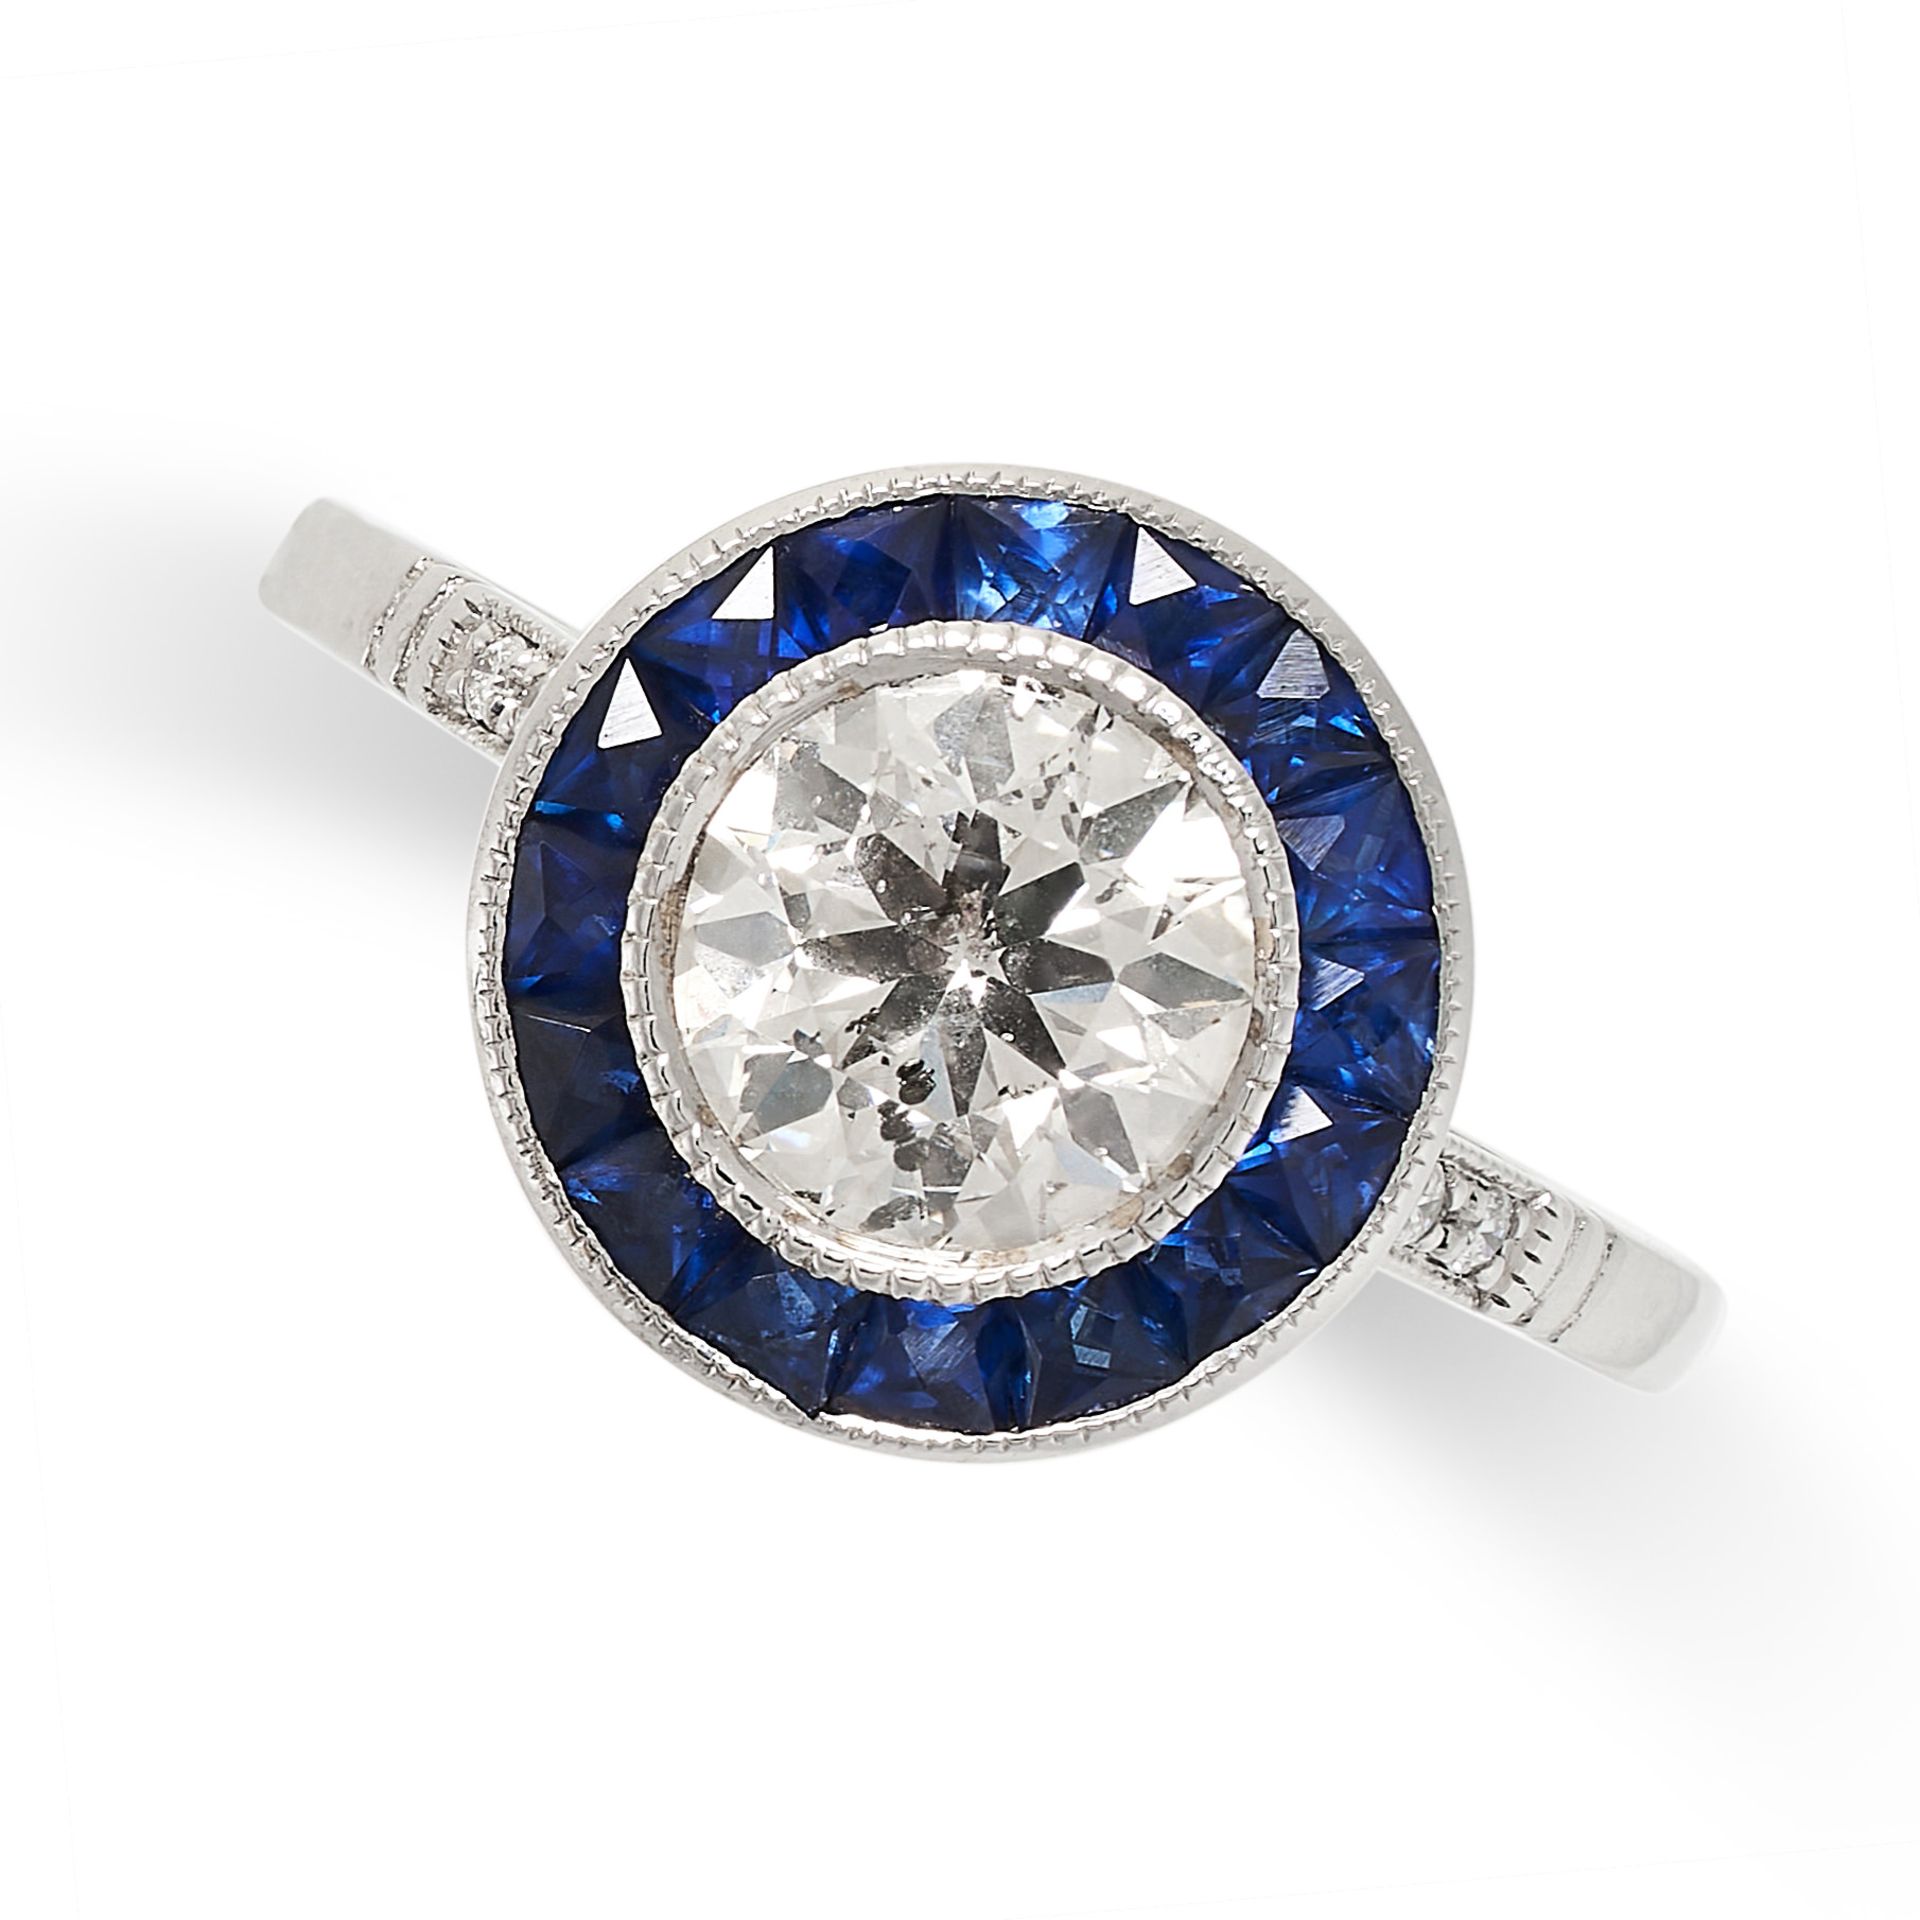 A DIAMOND AND SAPPHIRE TARGET RING set with a round cut diamond of 1.01 carats within a border of